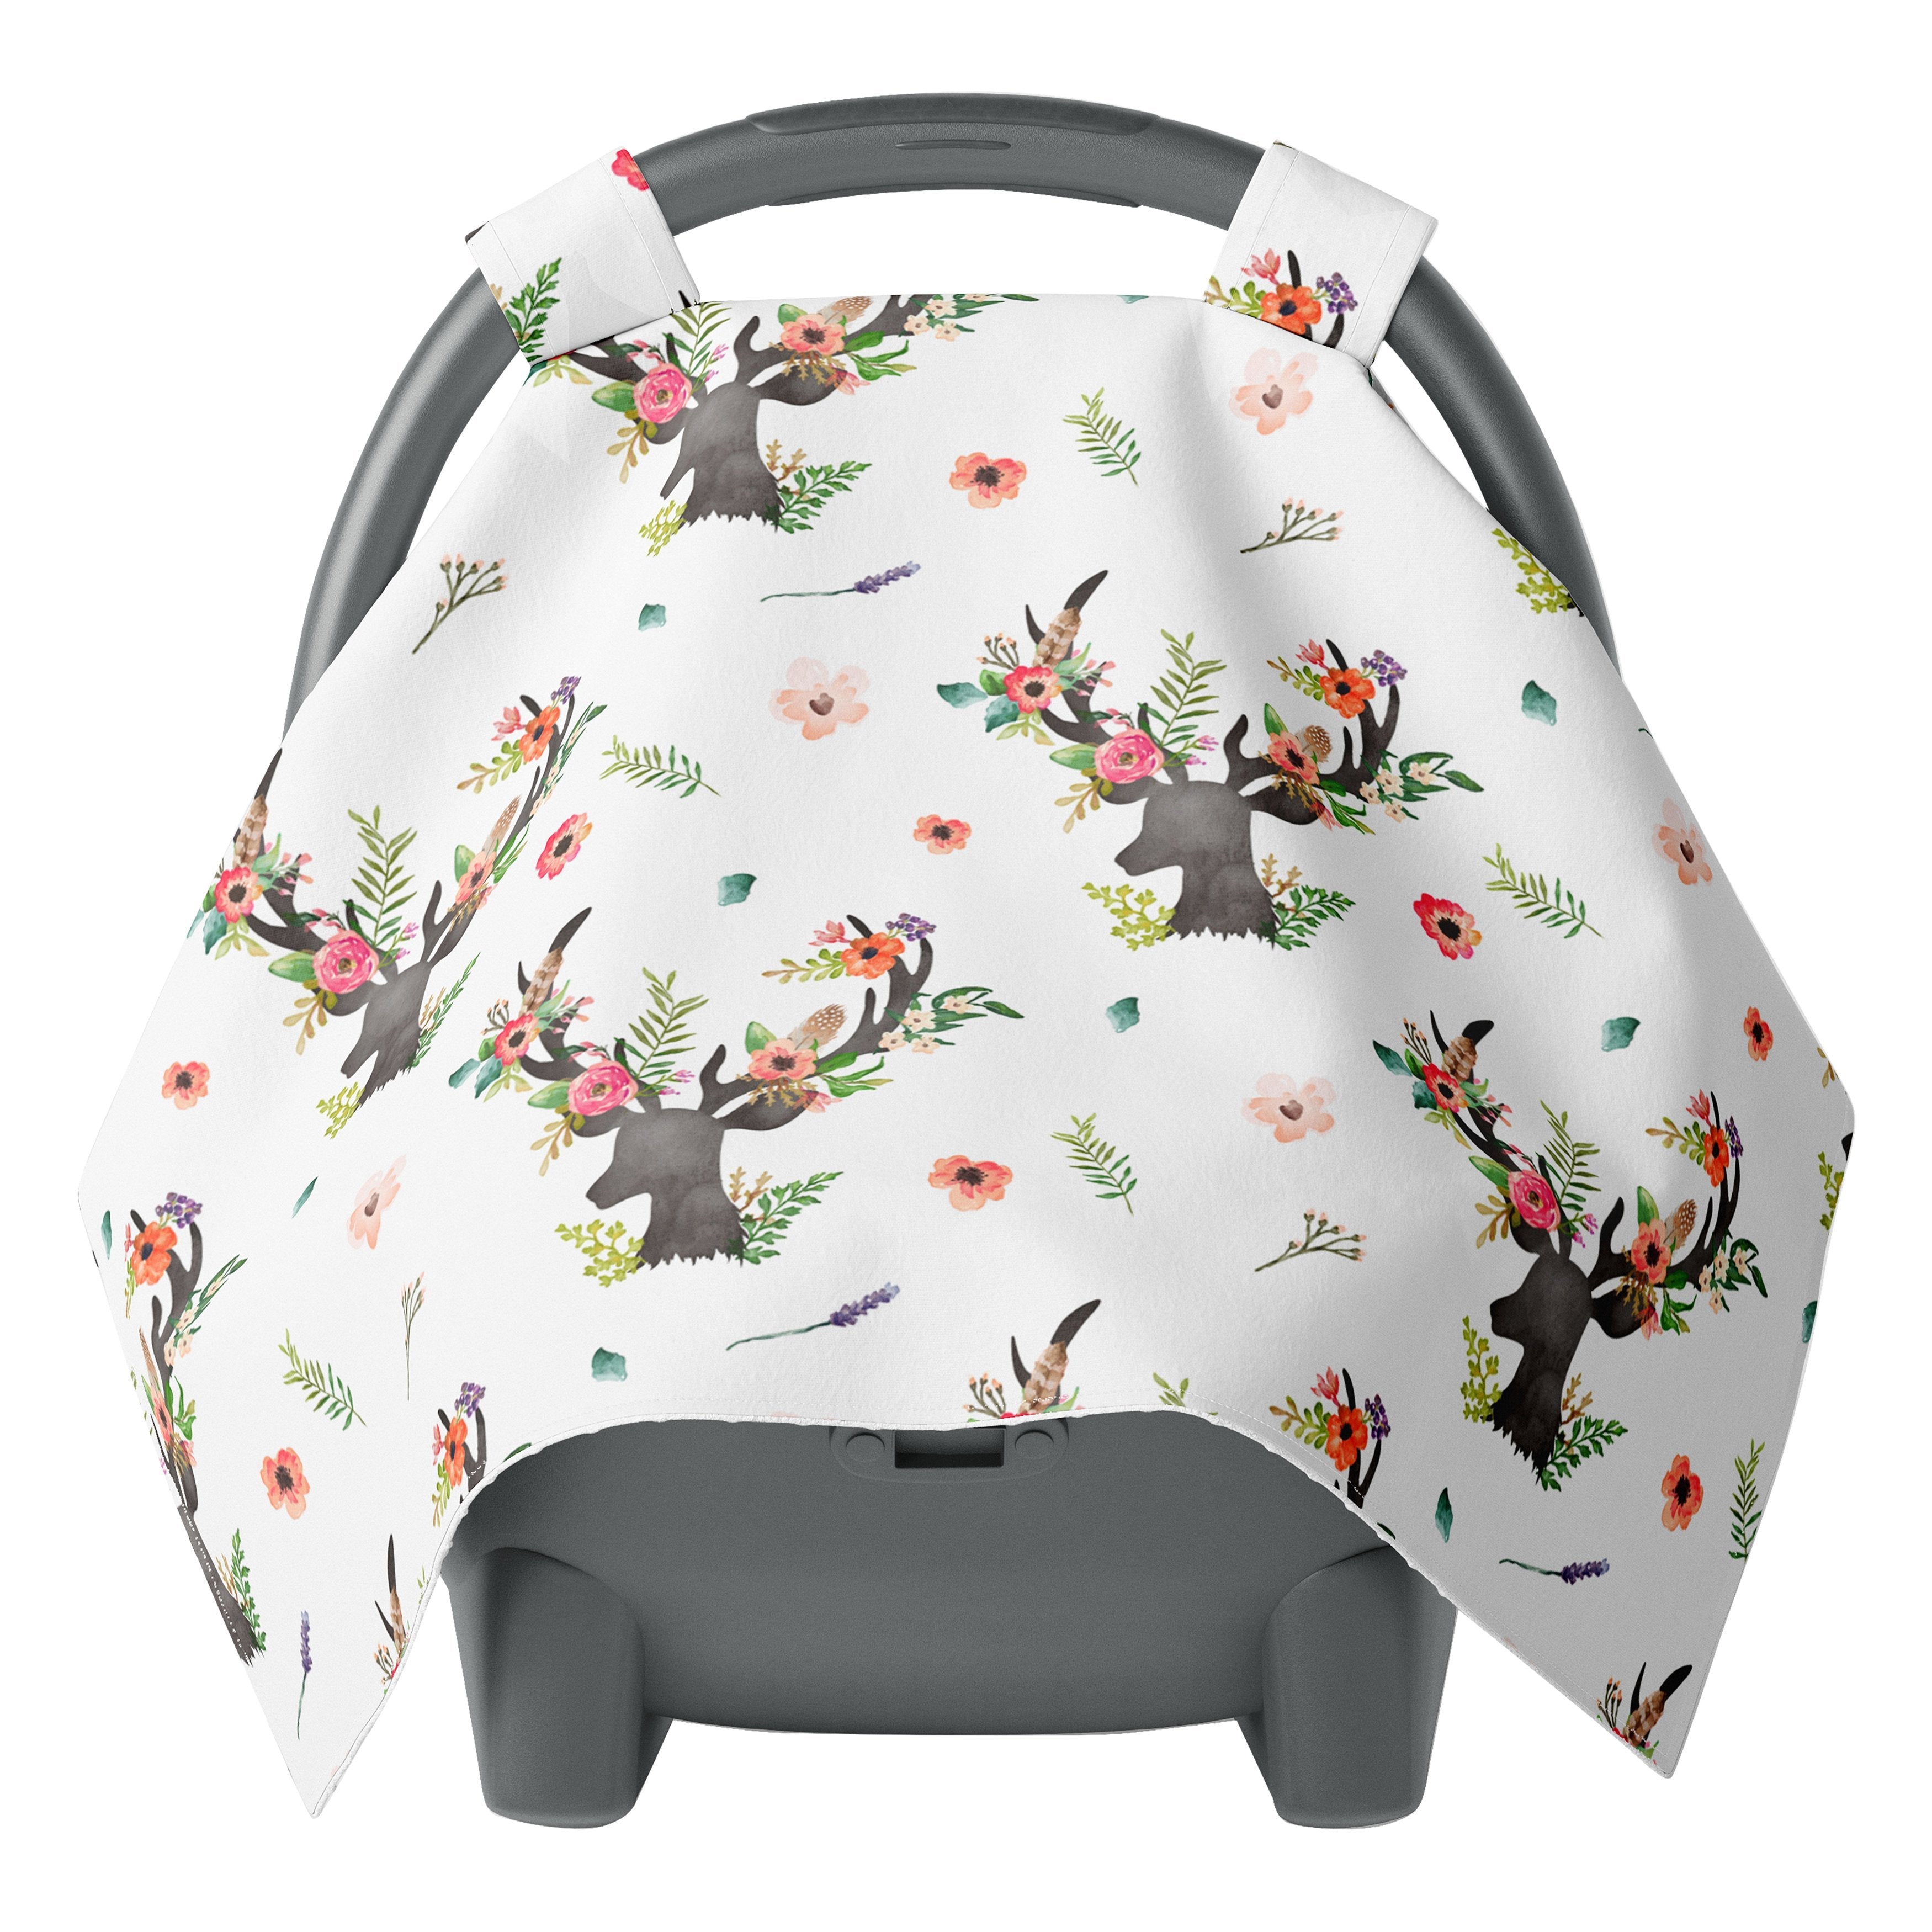 Floral Deer Carseat Canopy JLIKA - Free Shipping